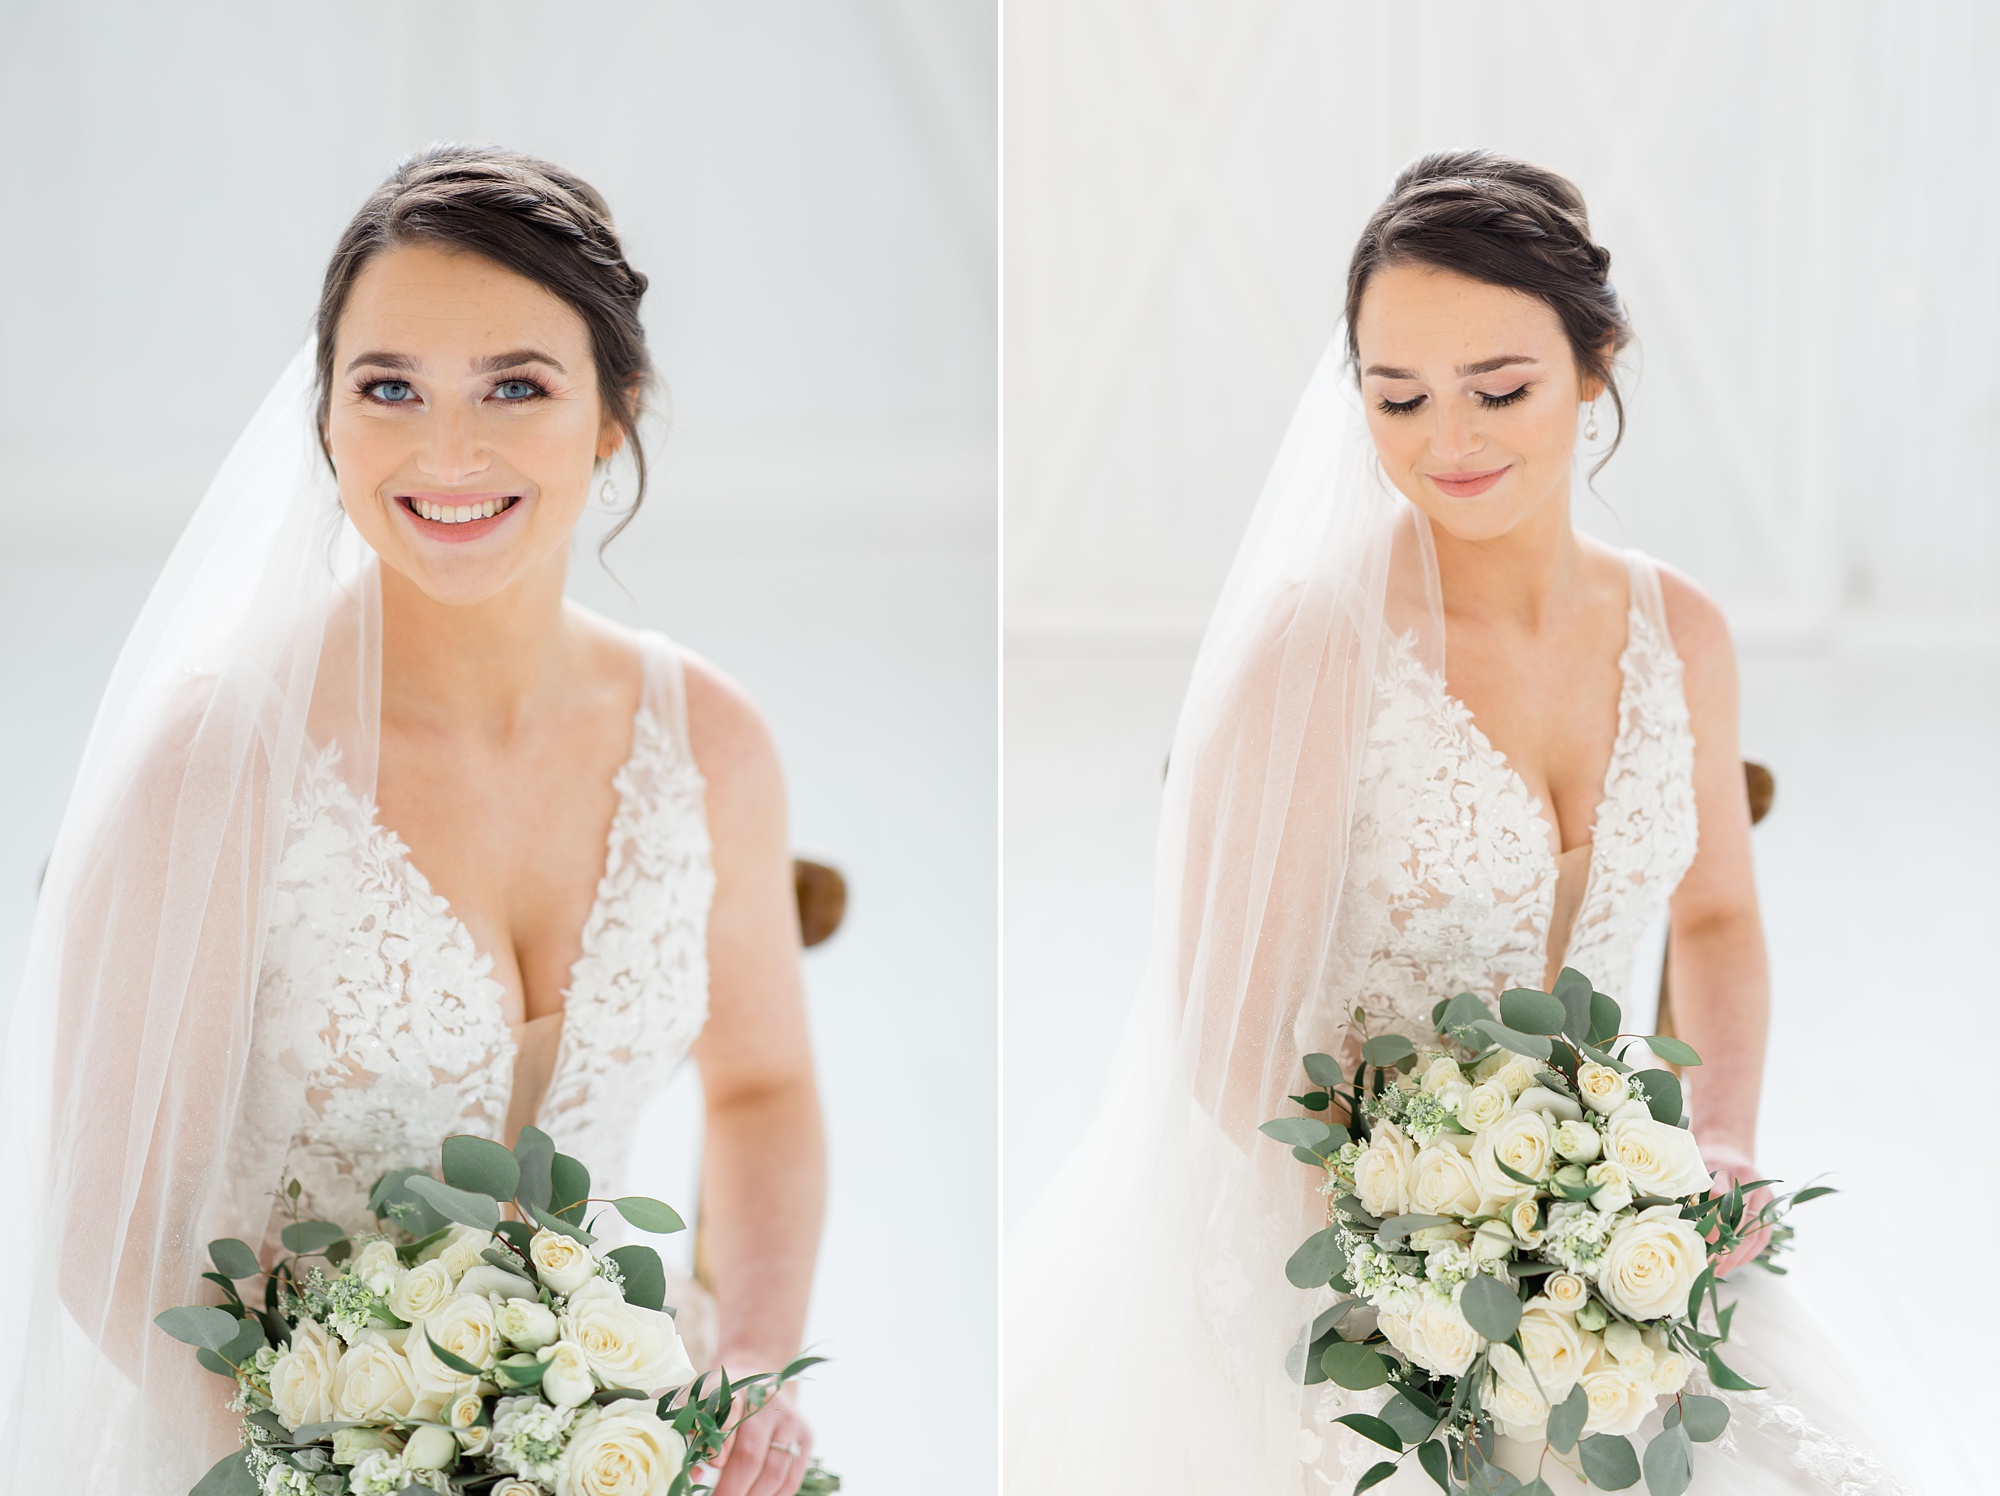 White Sparrow bridal portraits with bride holding bouquet of flowers